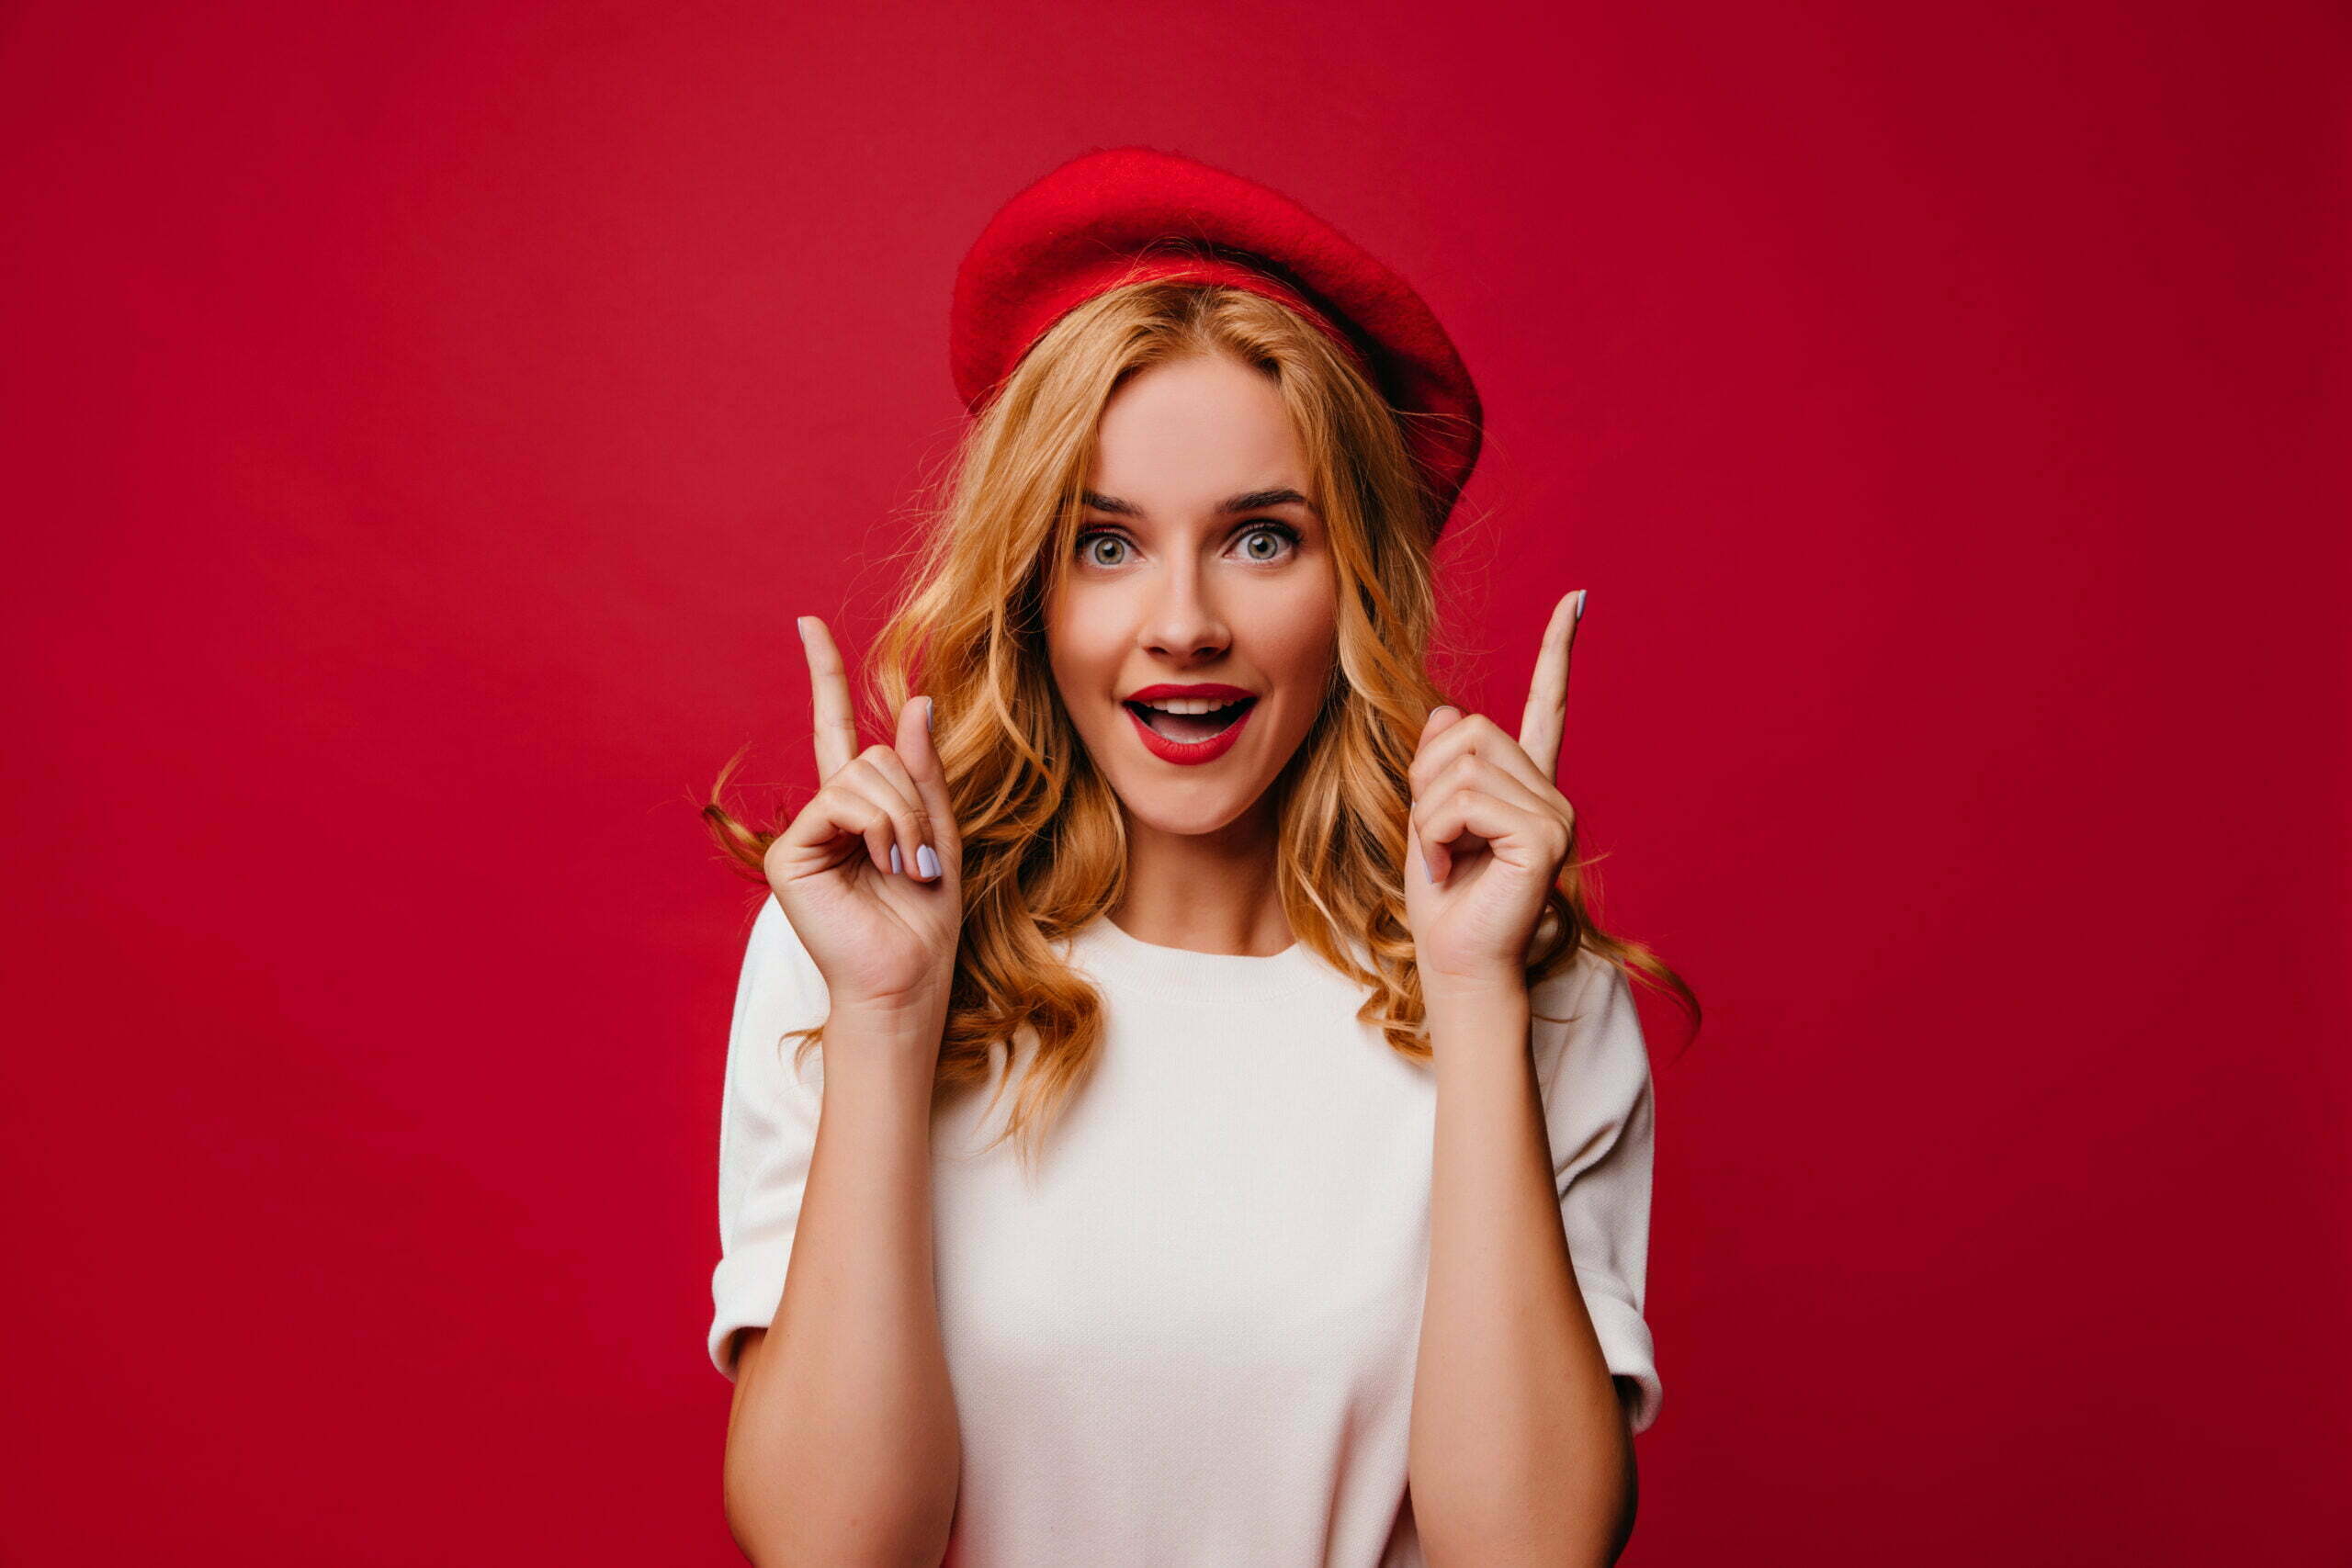 Ecstatic white girl in beret posing with amazement. Elegant caucasian female model in t-shirt standing on red background.